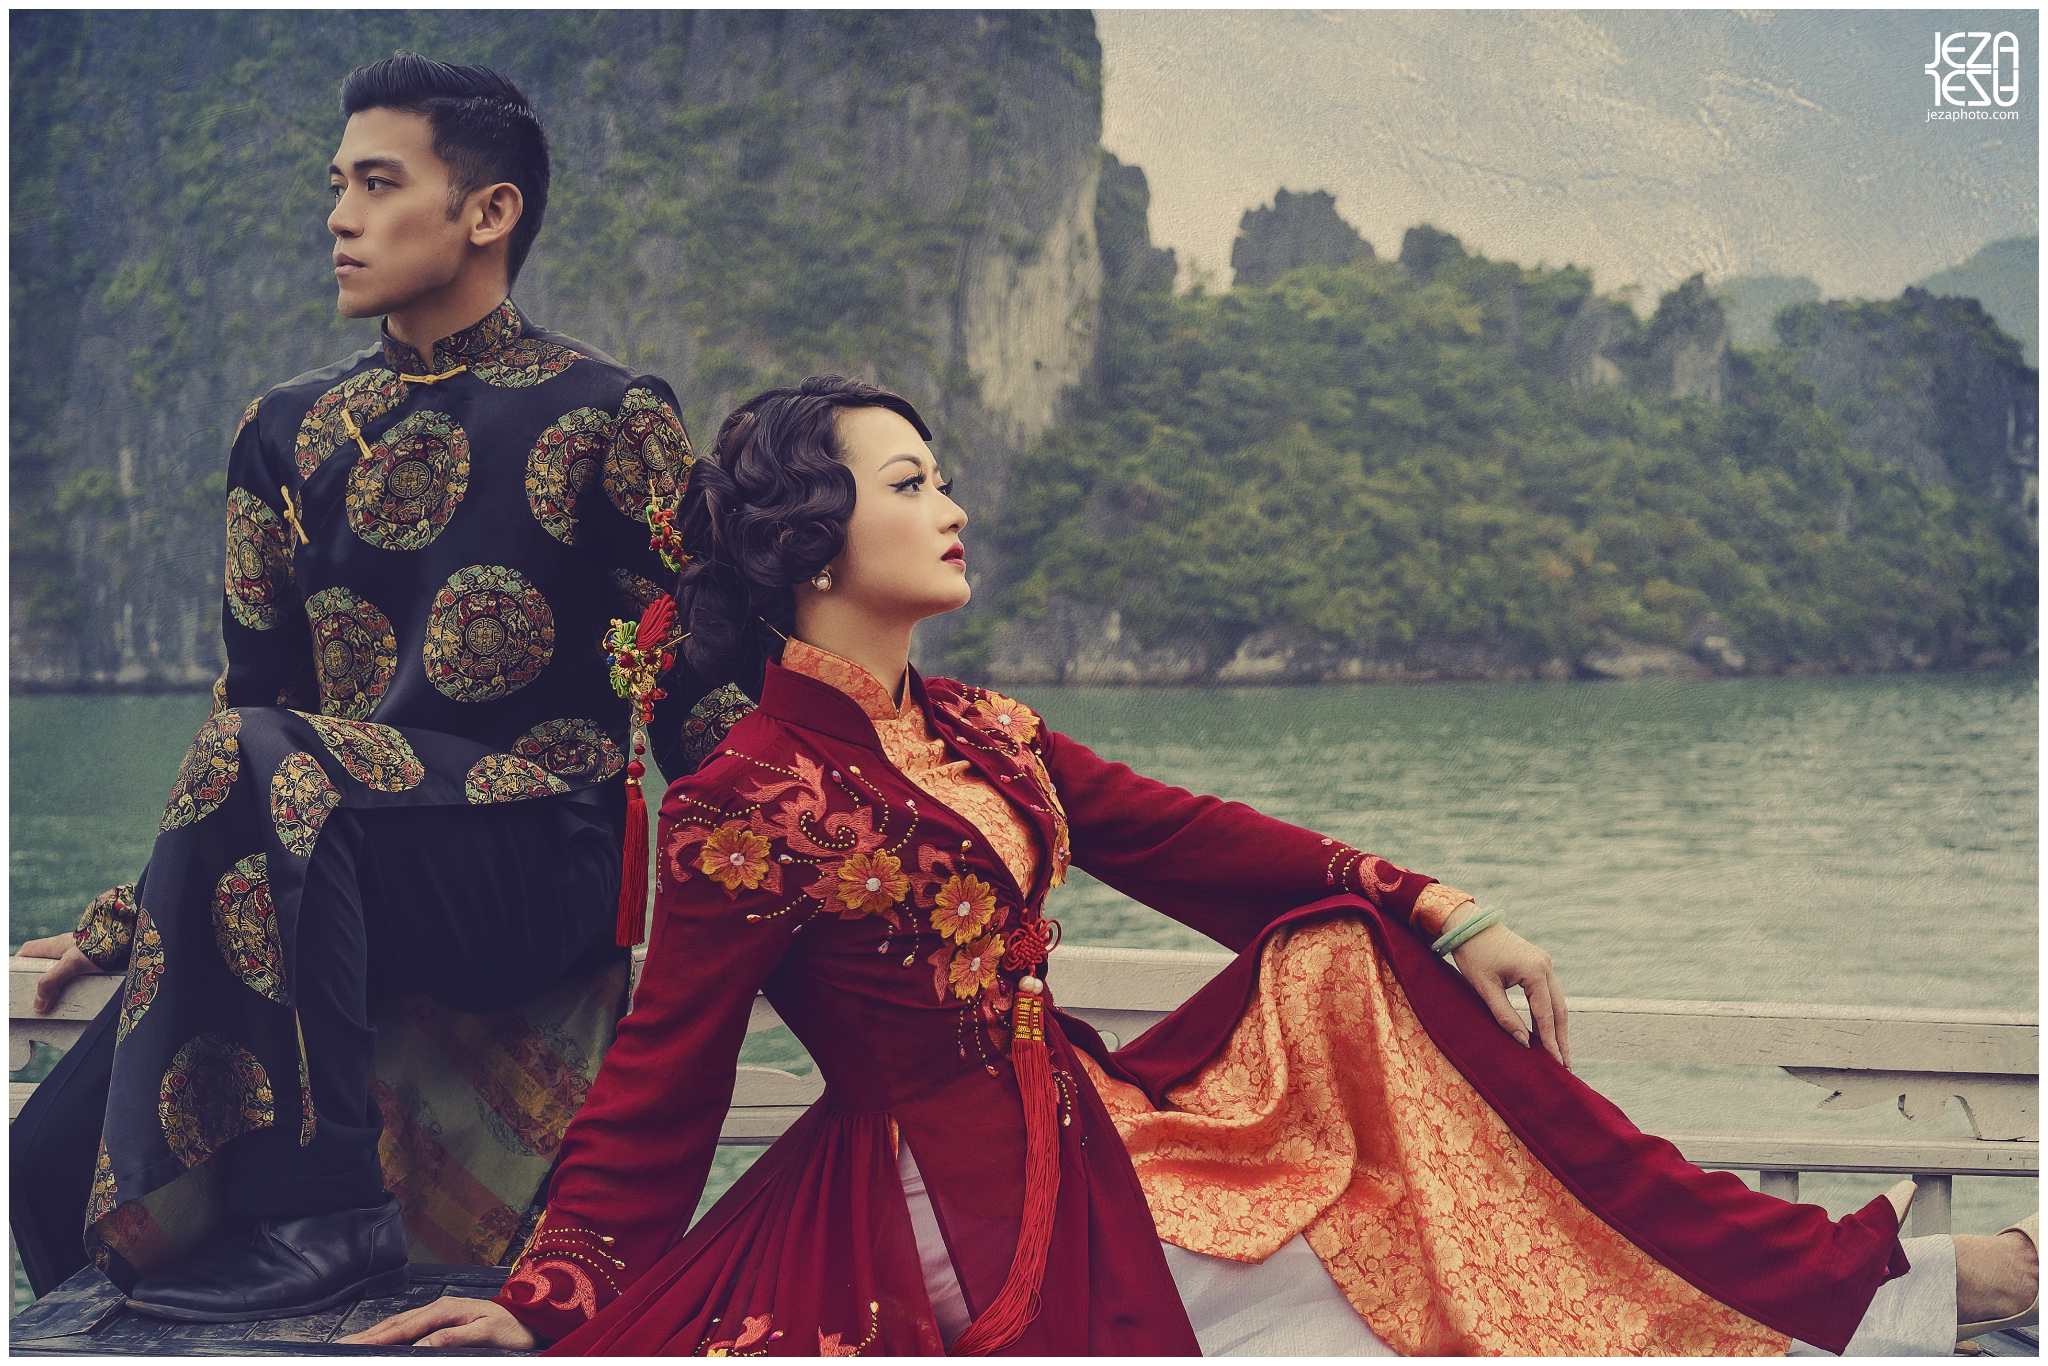 Asia Vietnam Pre Wedding Engagement on a Boat